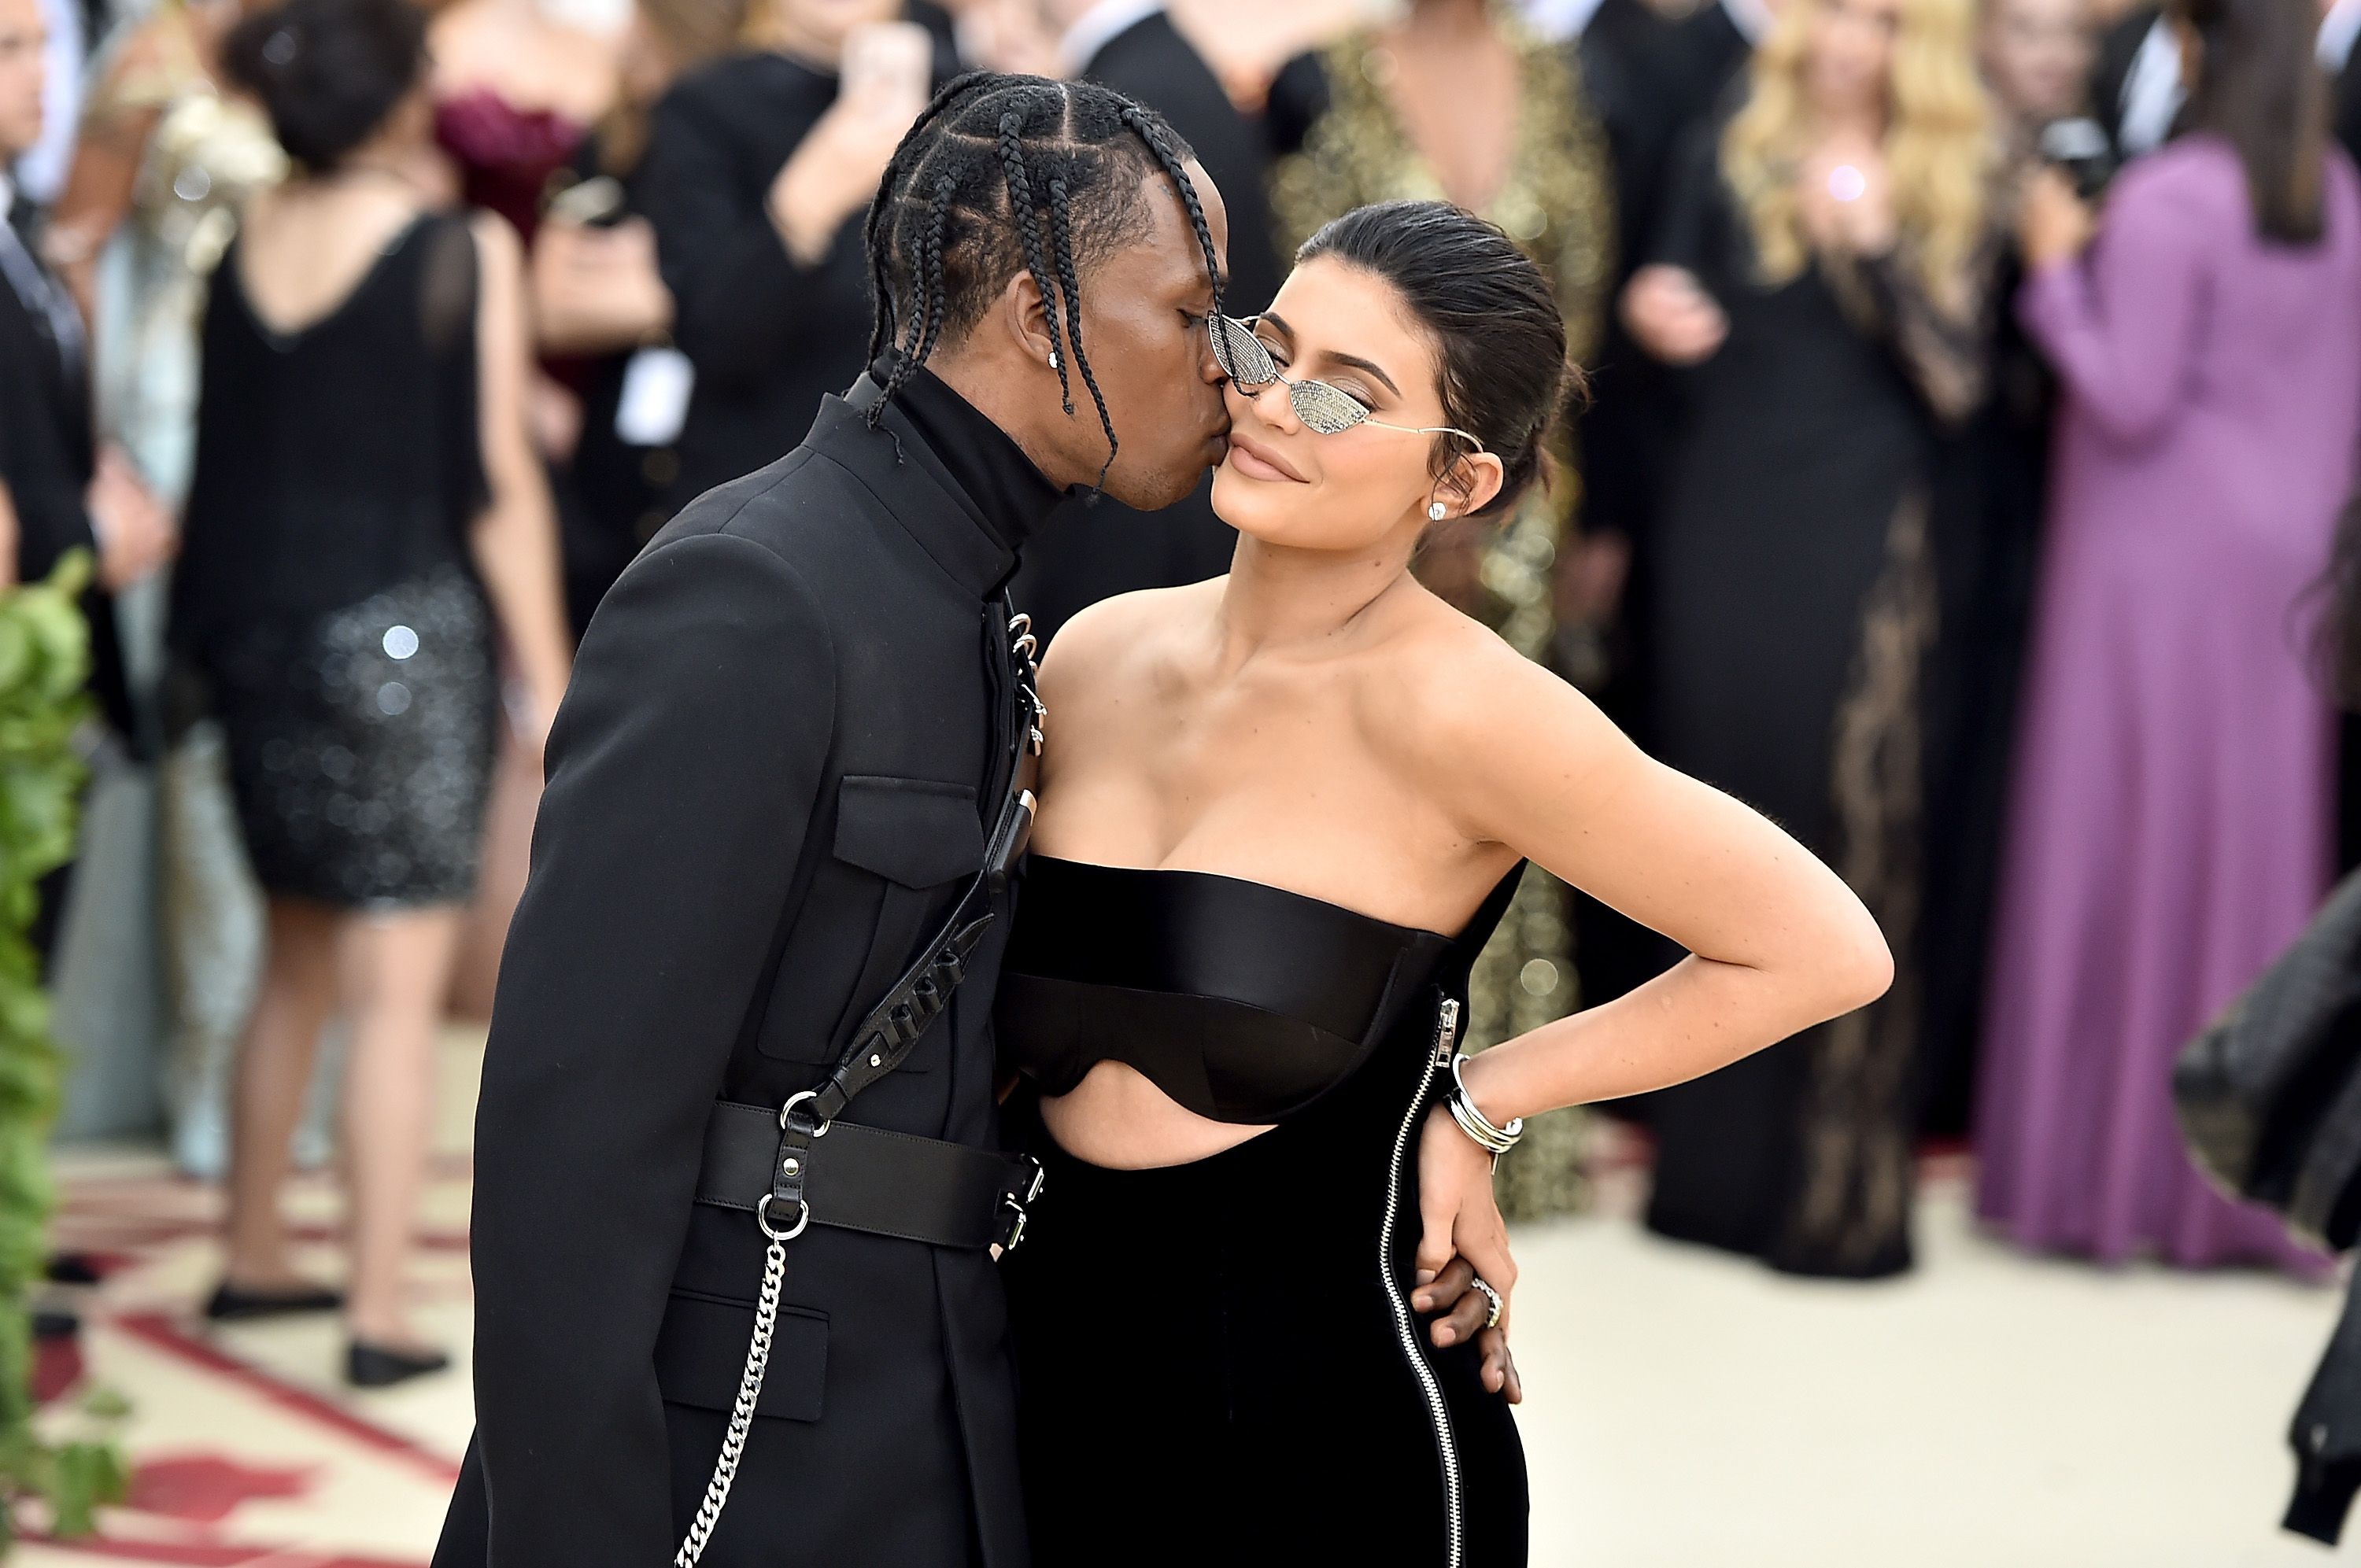 Every Mention of Kylie Jenner in Travis Scott's New Album - Kylie Jenner on "Astroworld"